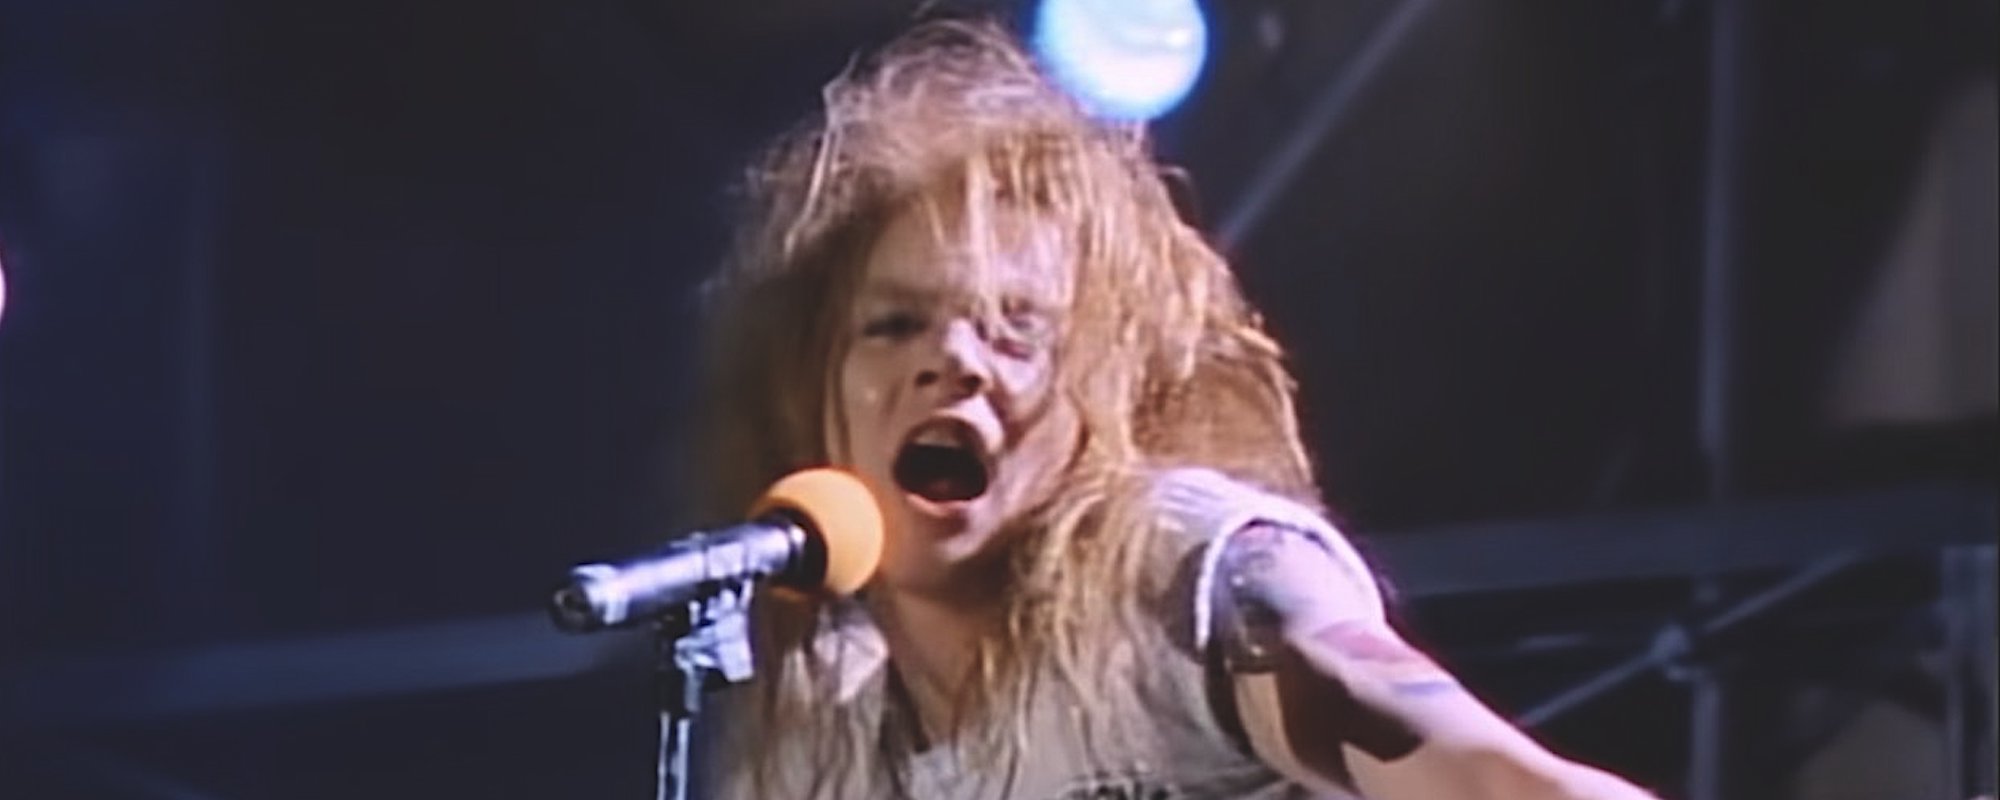 The Meaning Behind Guns N’ Roses’ Hair-Raising 1987 Hit “Welcome to the Jungle”